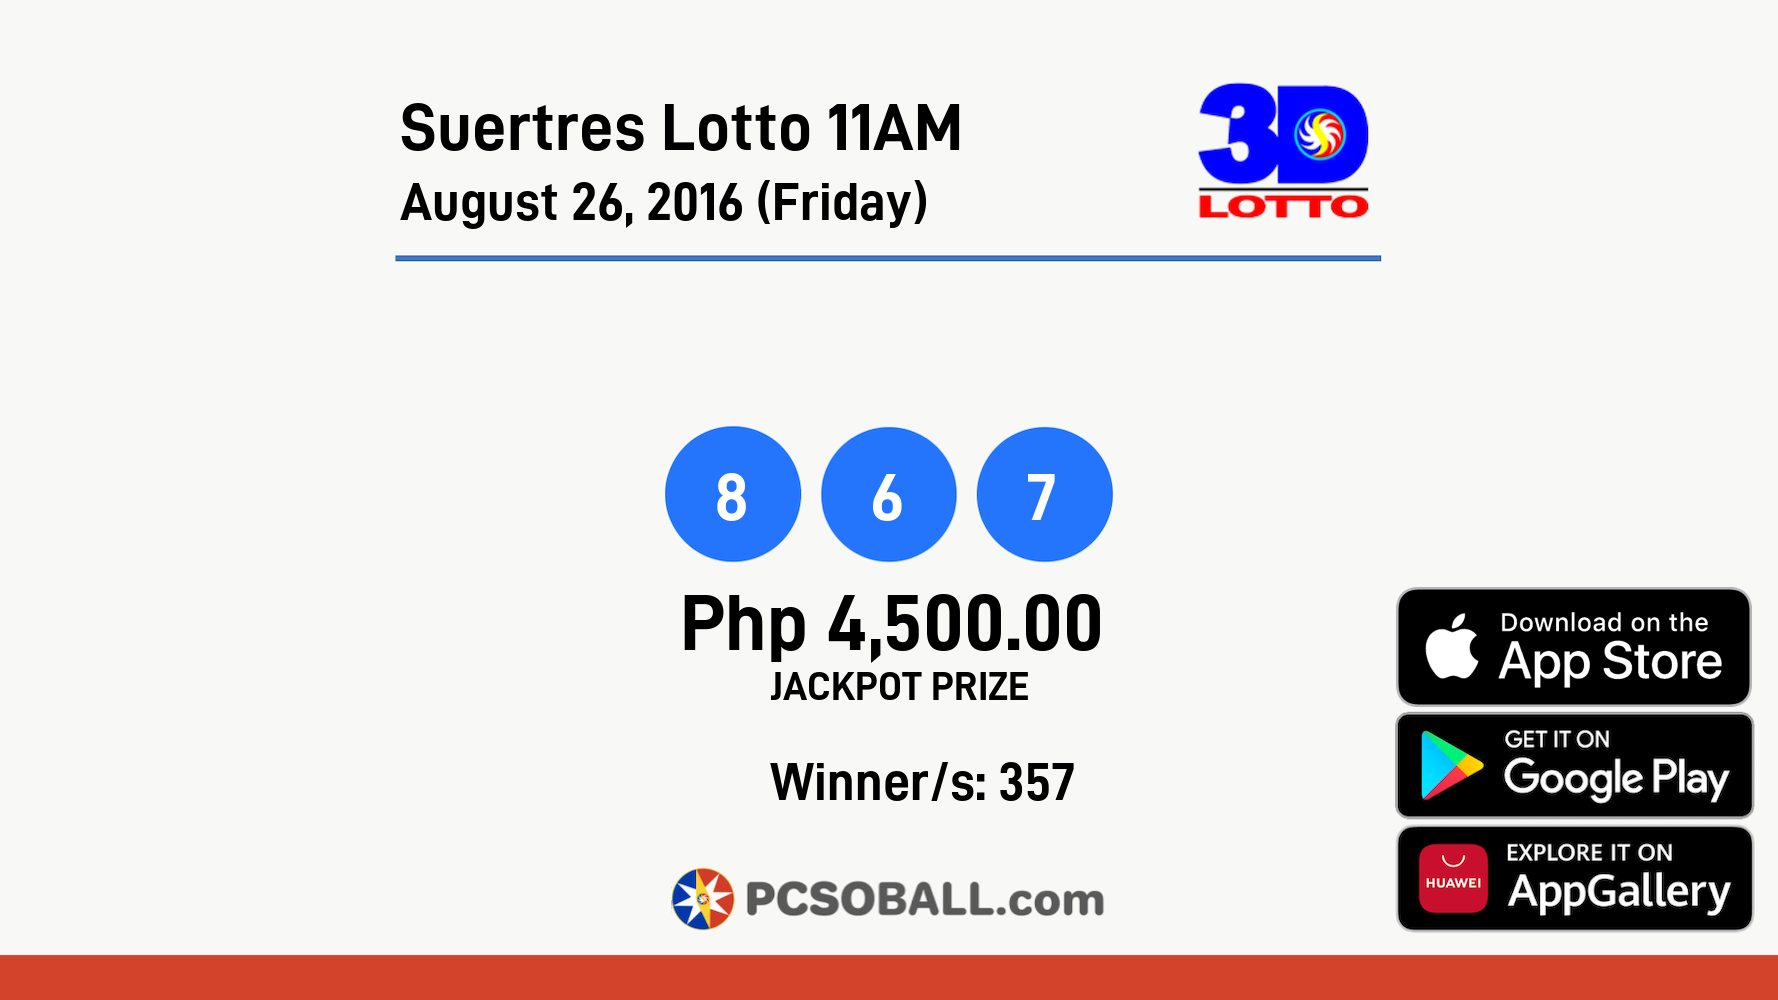 Suertres Lotto 11AM August 26, 2016 (Friday) Result